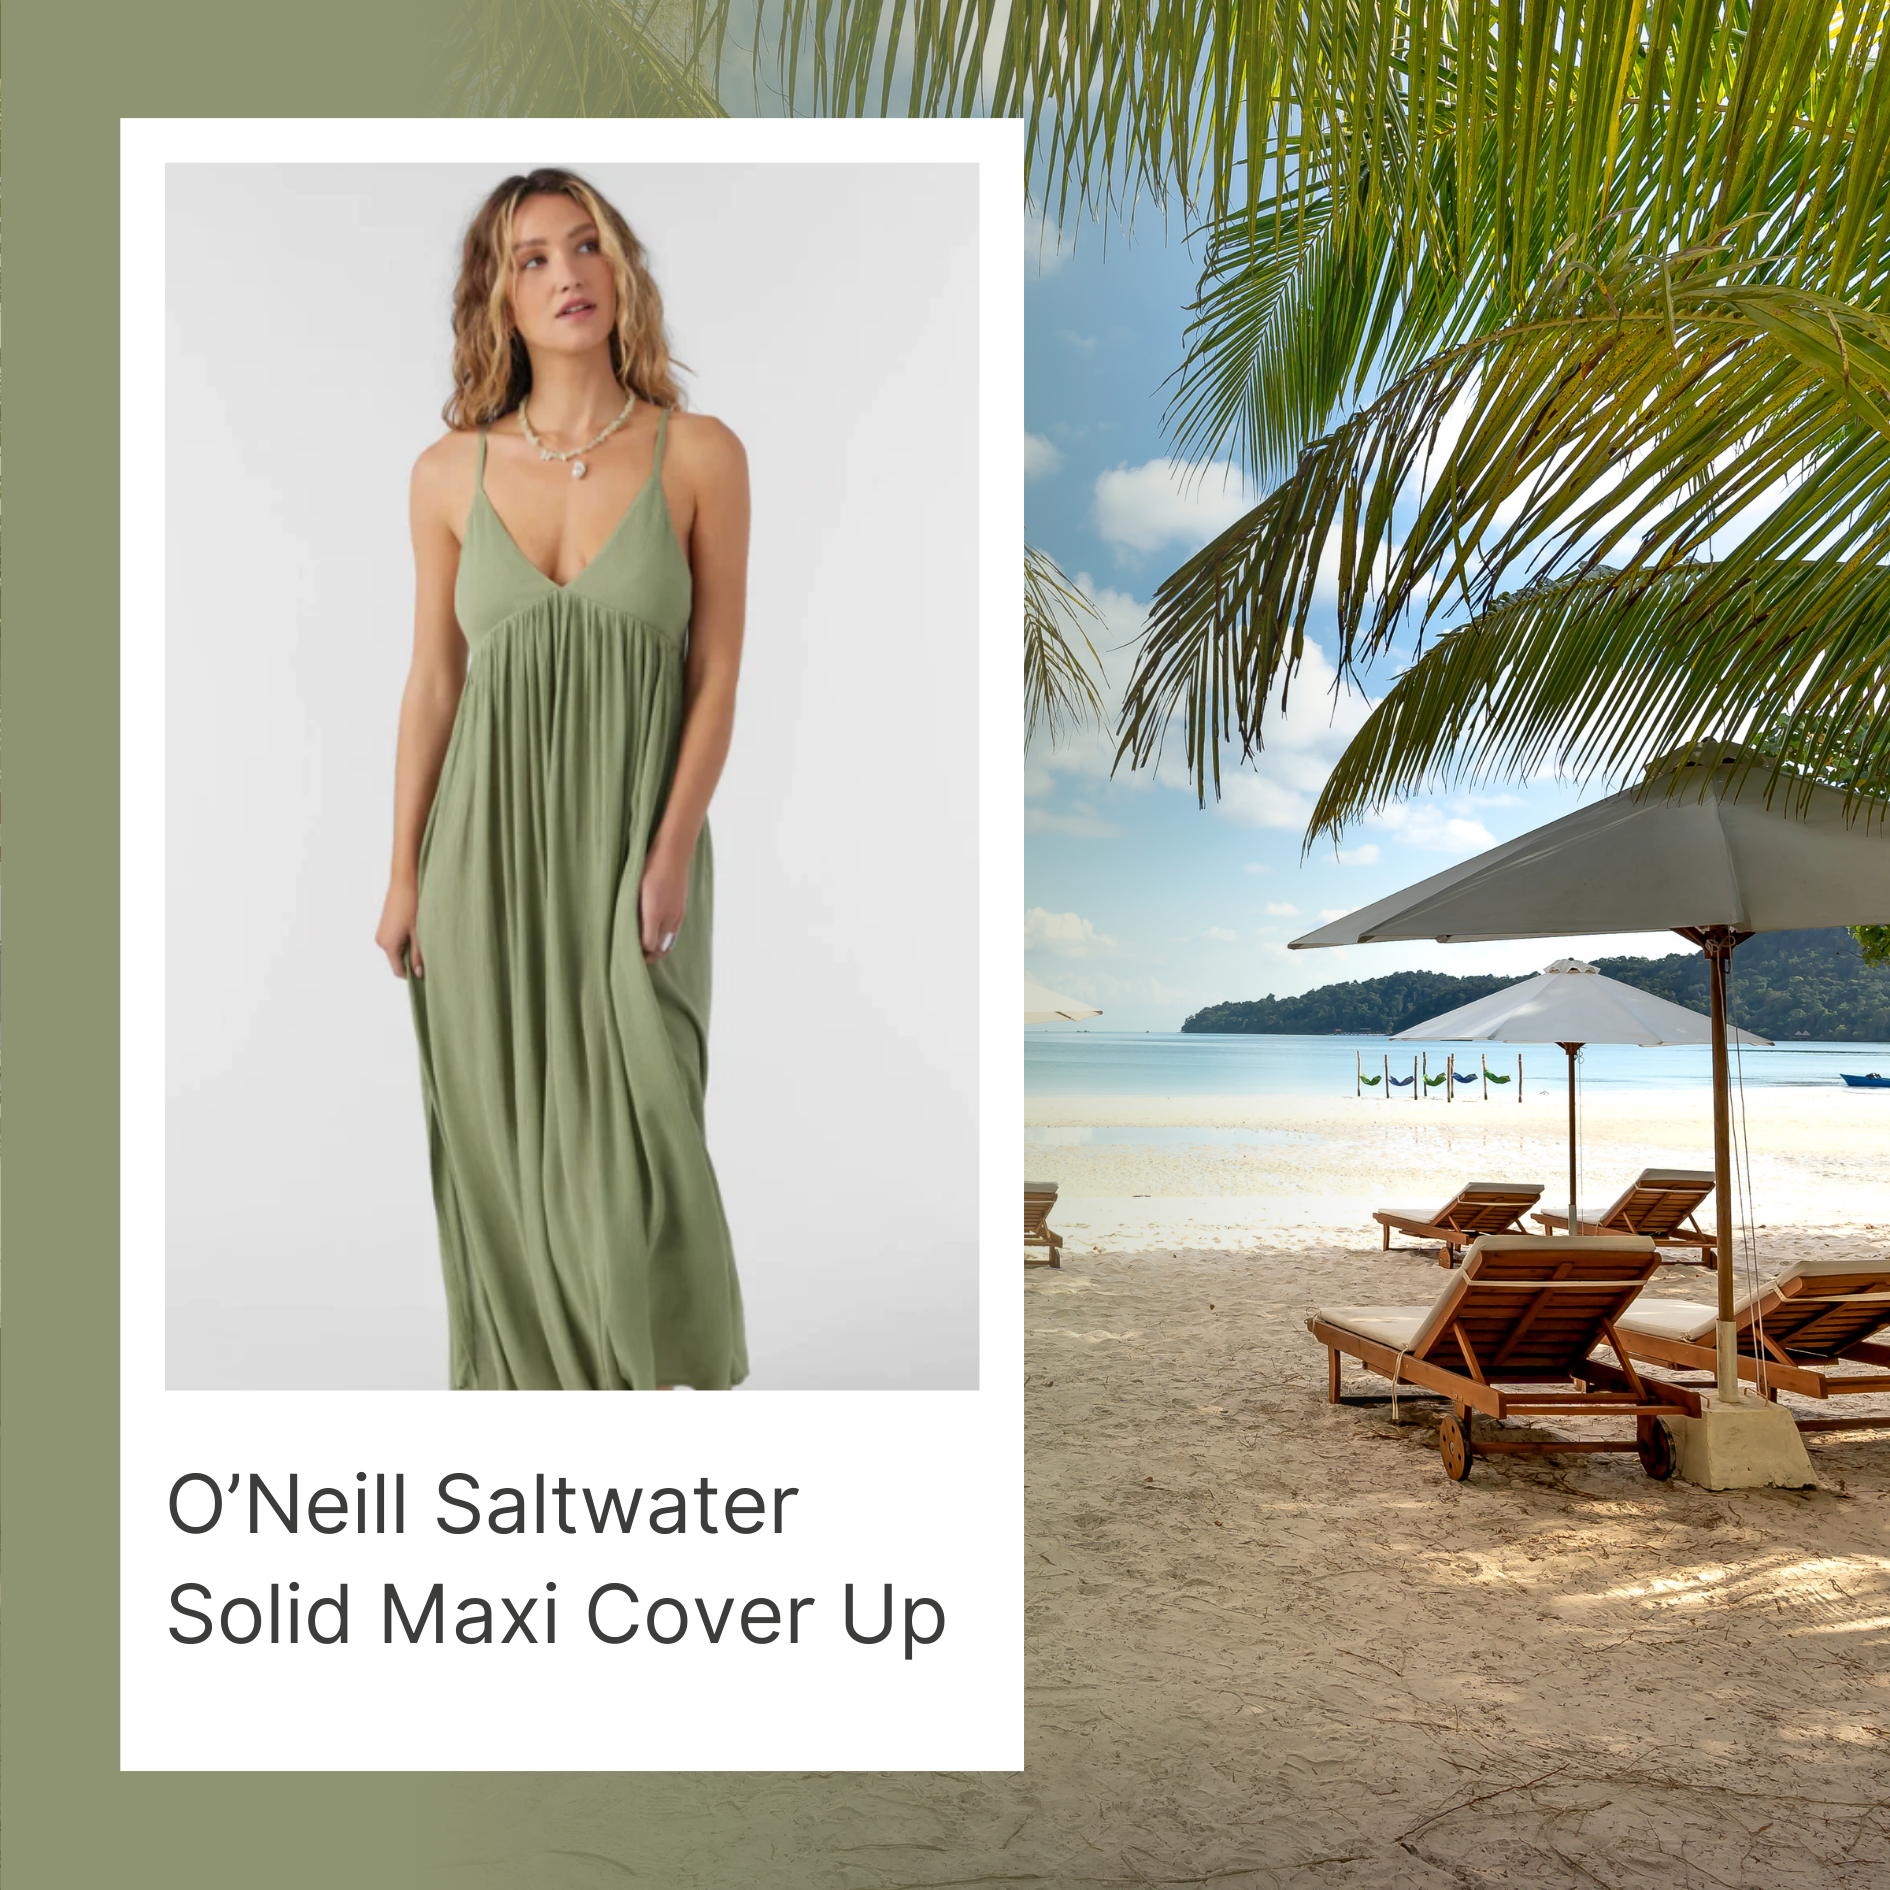 From the Beach to the Boat: 4 Women's Styles of Beach Cover-Ups